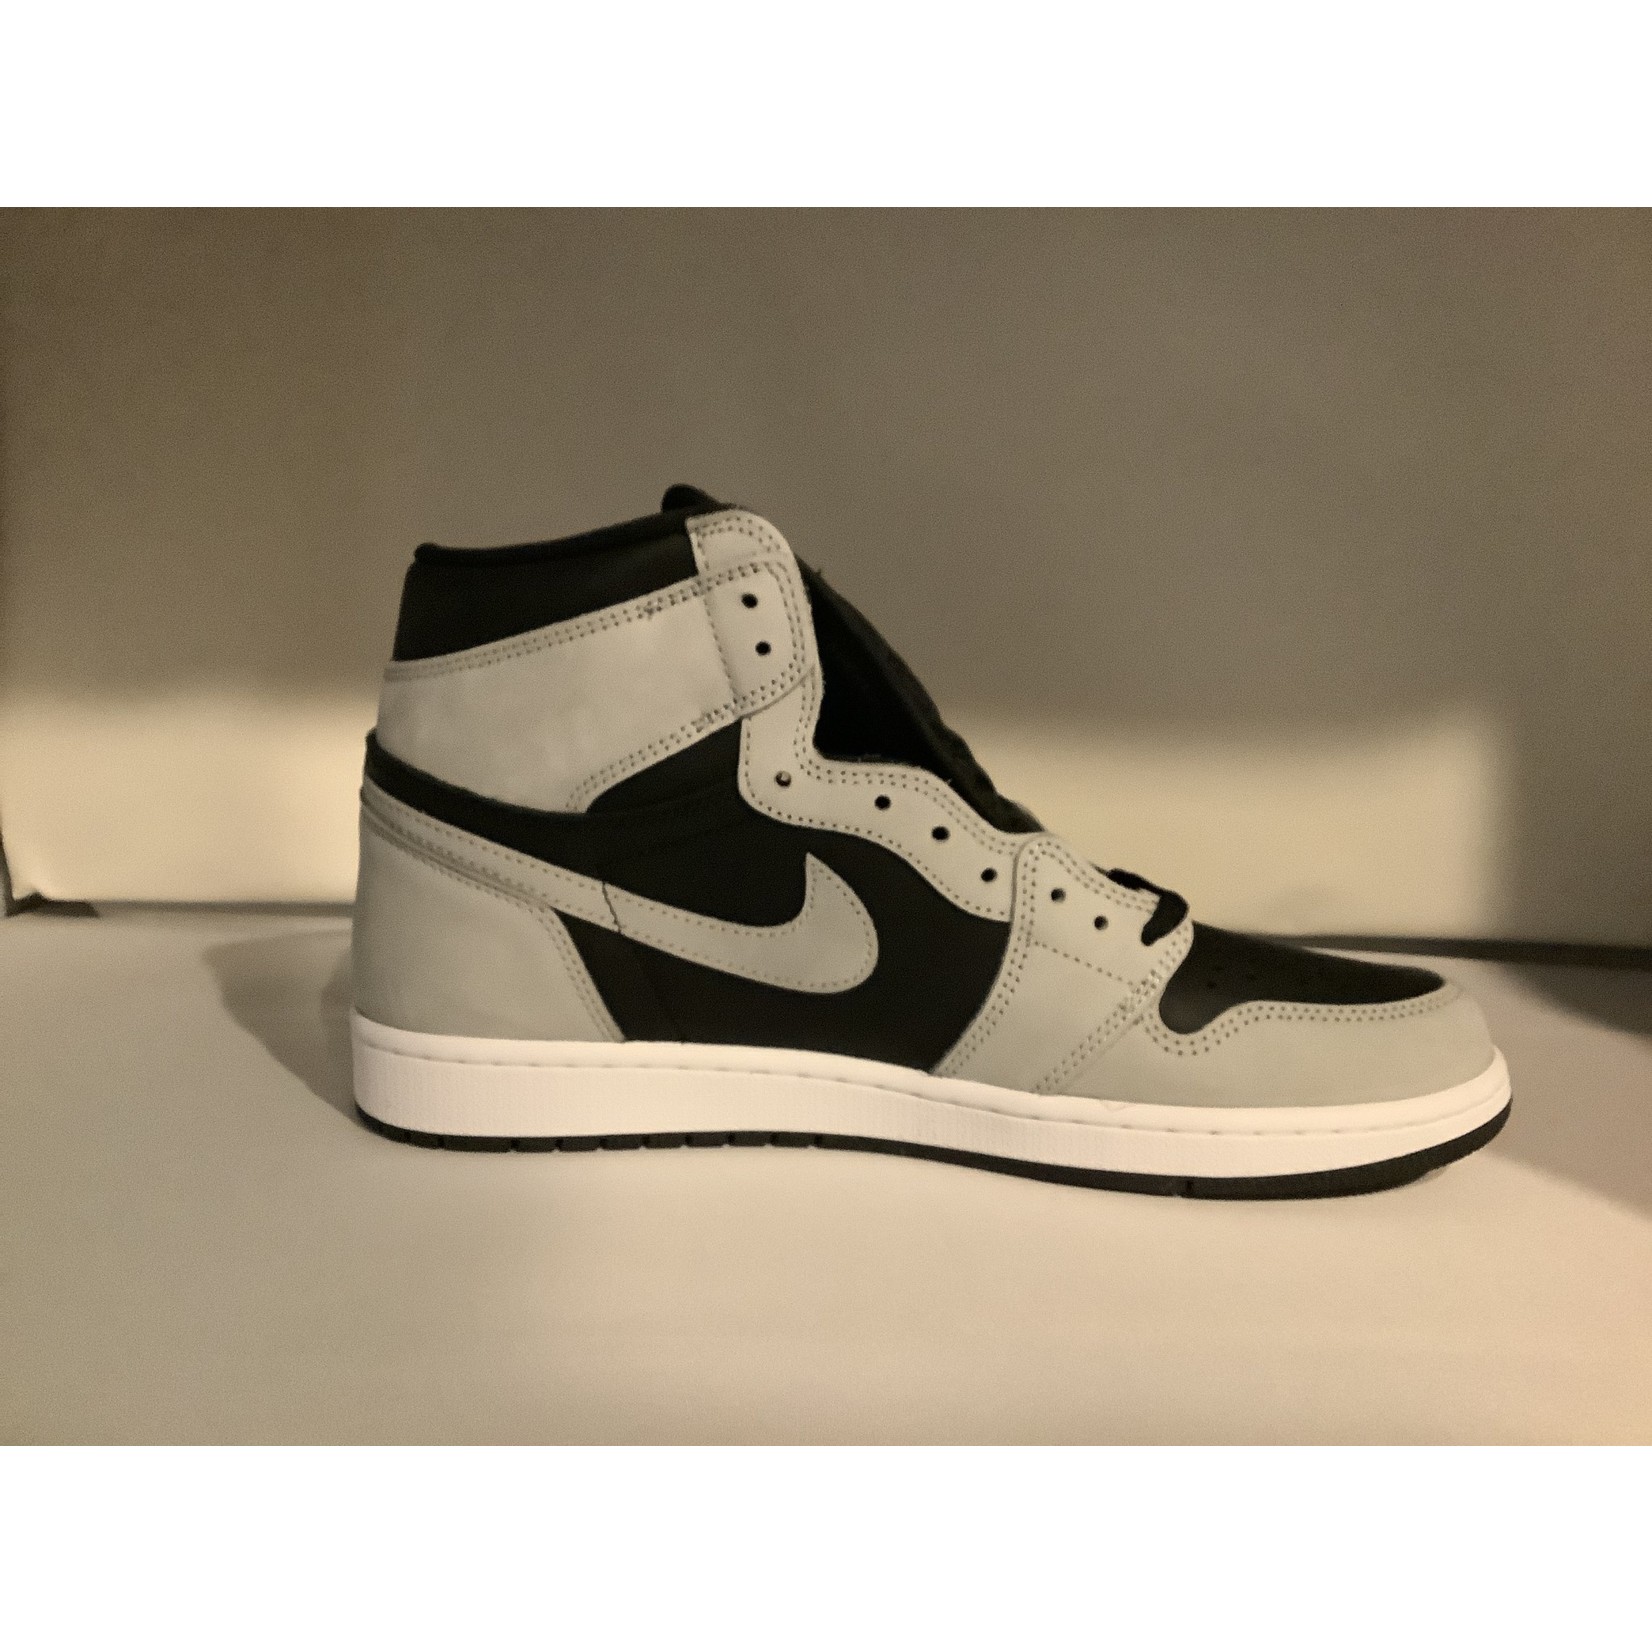 Jordan 1 Shadow 2.0 - Grail City Shoes and Clothing